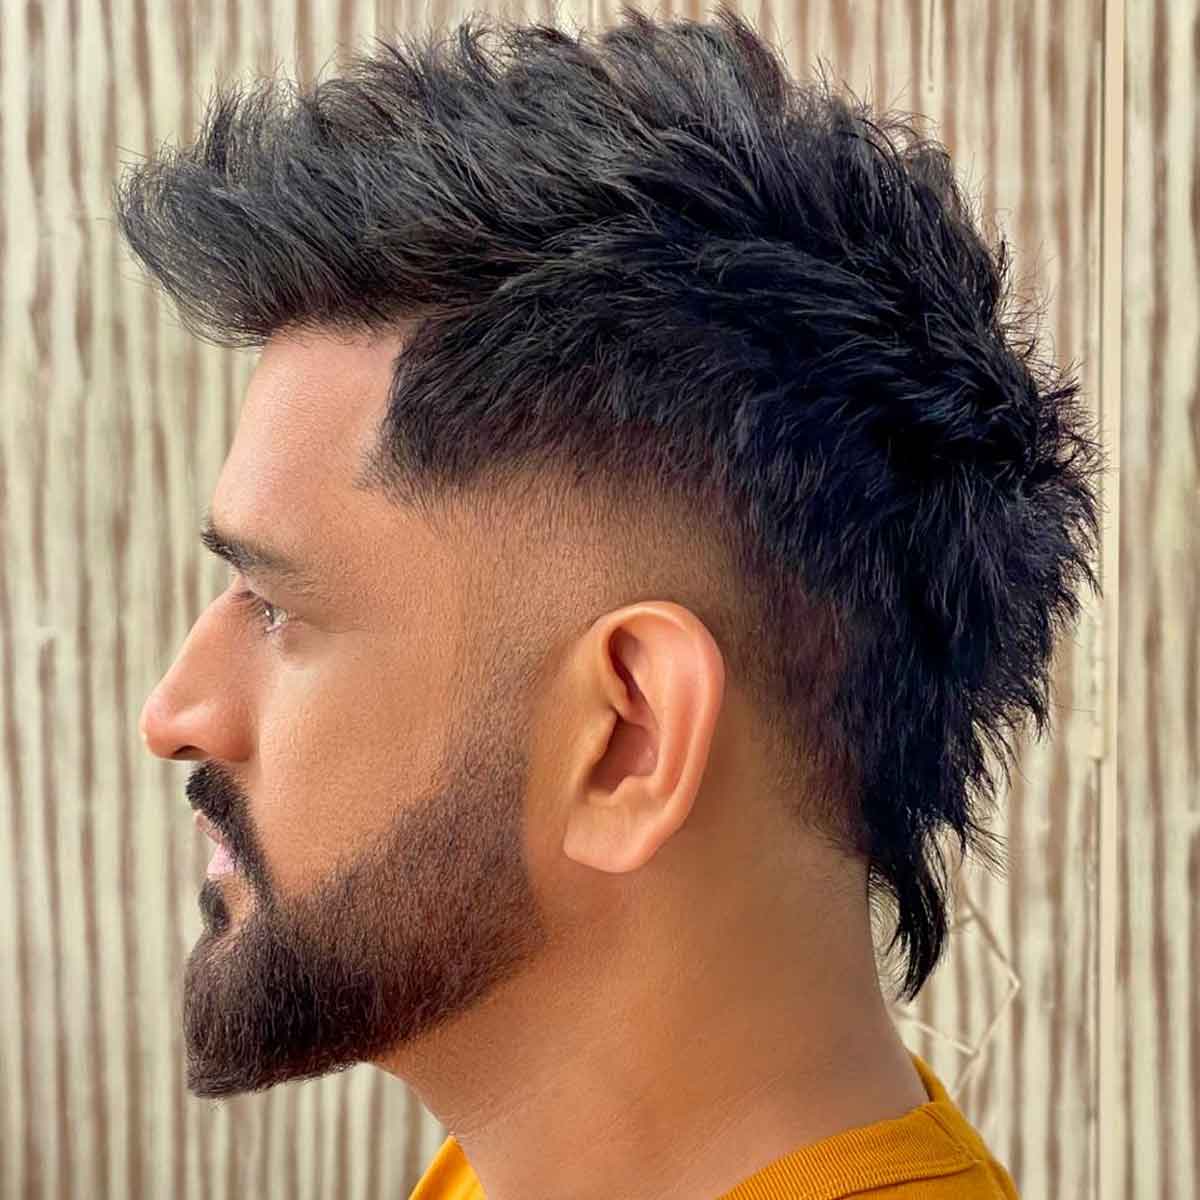 39 Cool VShaped Neckline Haircuts For Men in 2023